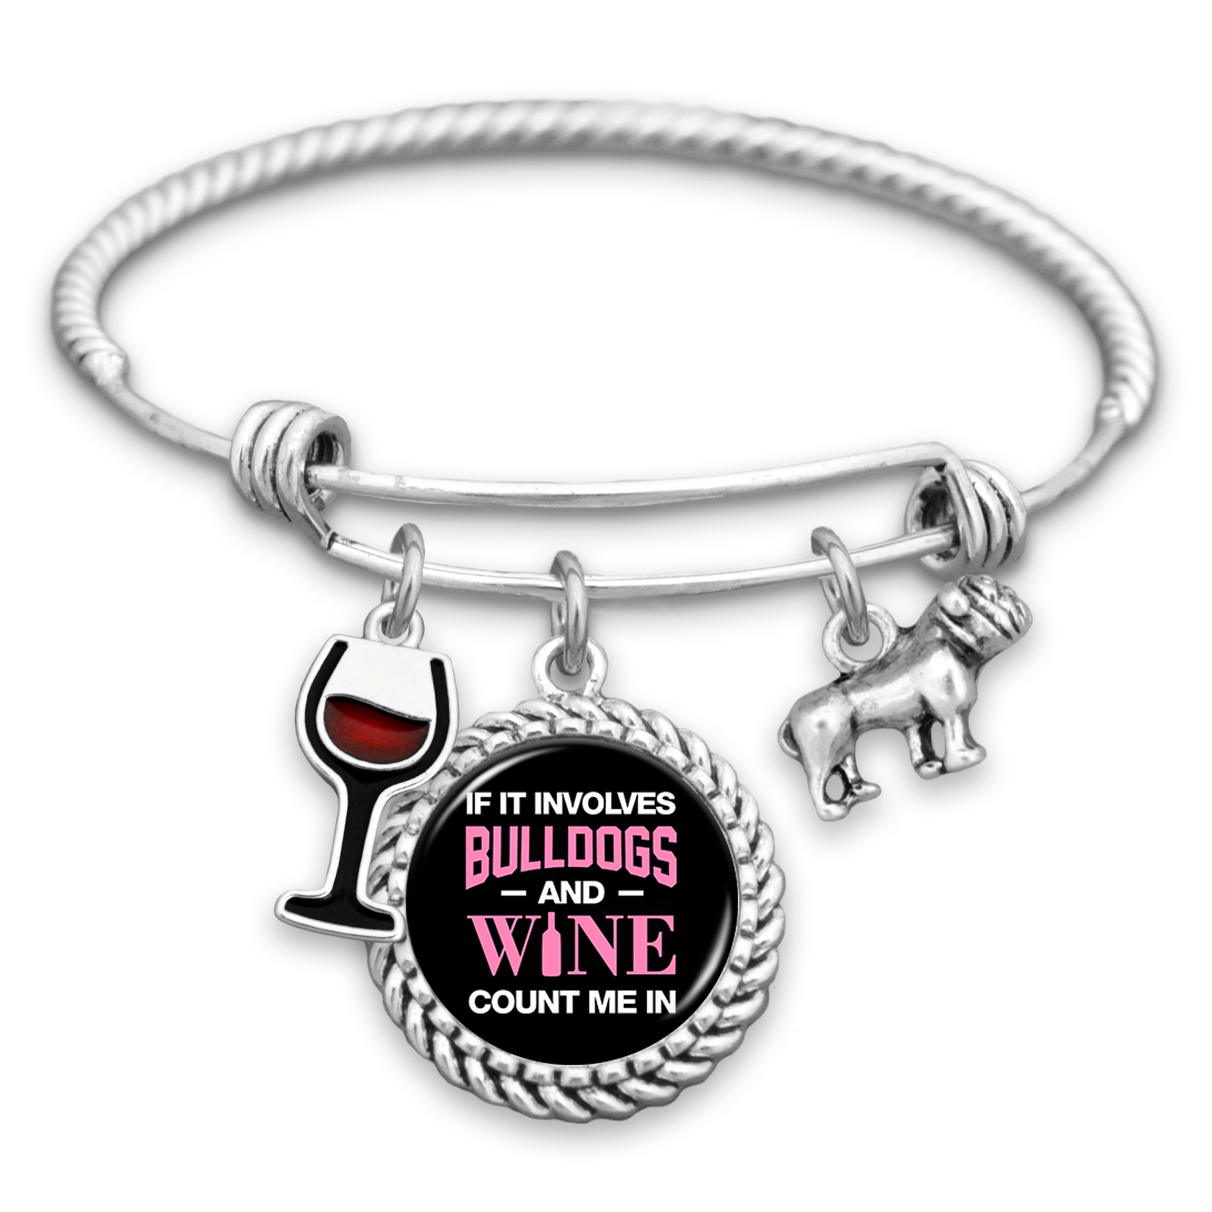 If It Involves Bulldogs And Wine, Count Me In Charm Bracelet